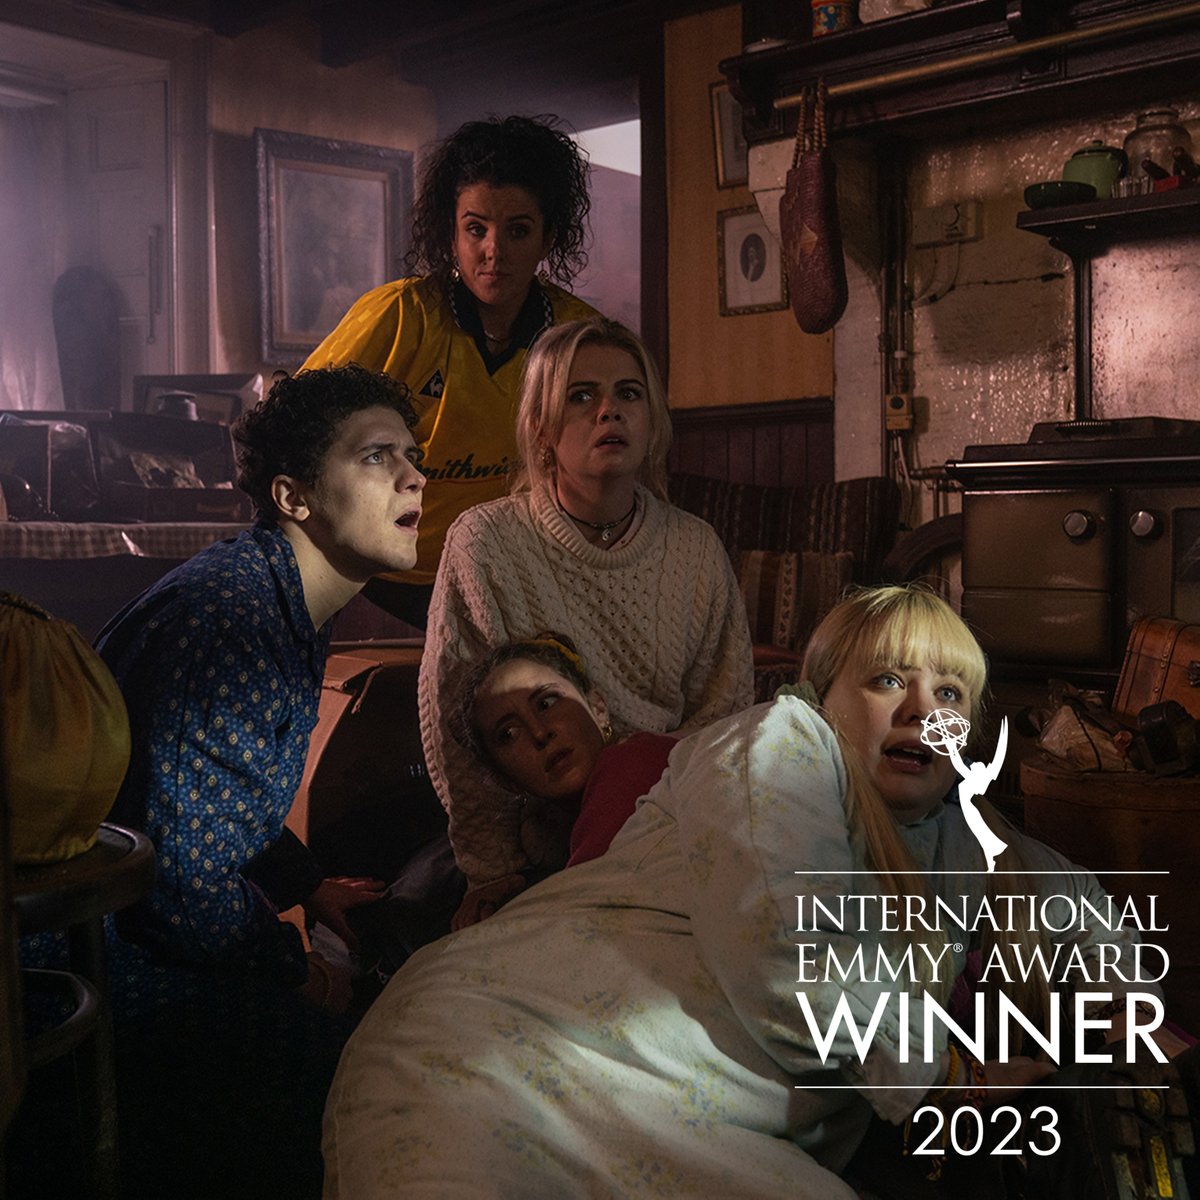 We have a Tie! The International Emmy for Comedy goes to 'Derry Girls - Season 3” produced by Hat Trick Productions #iemmyWIN